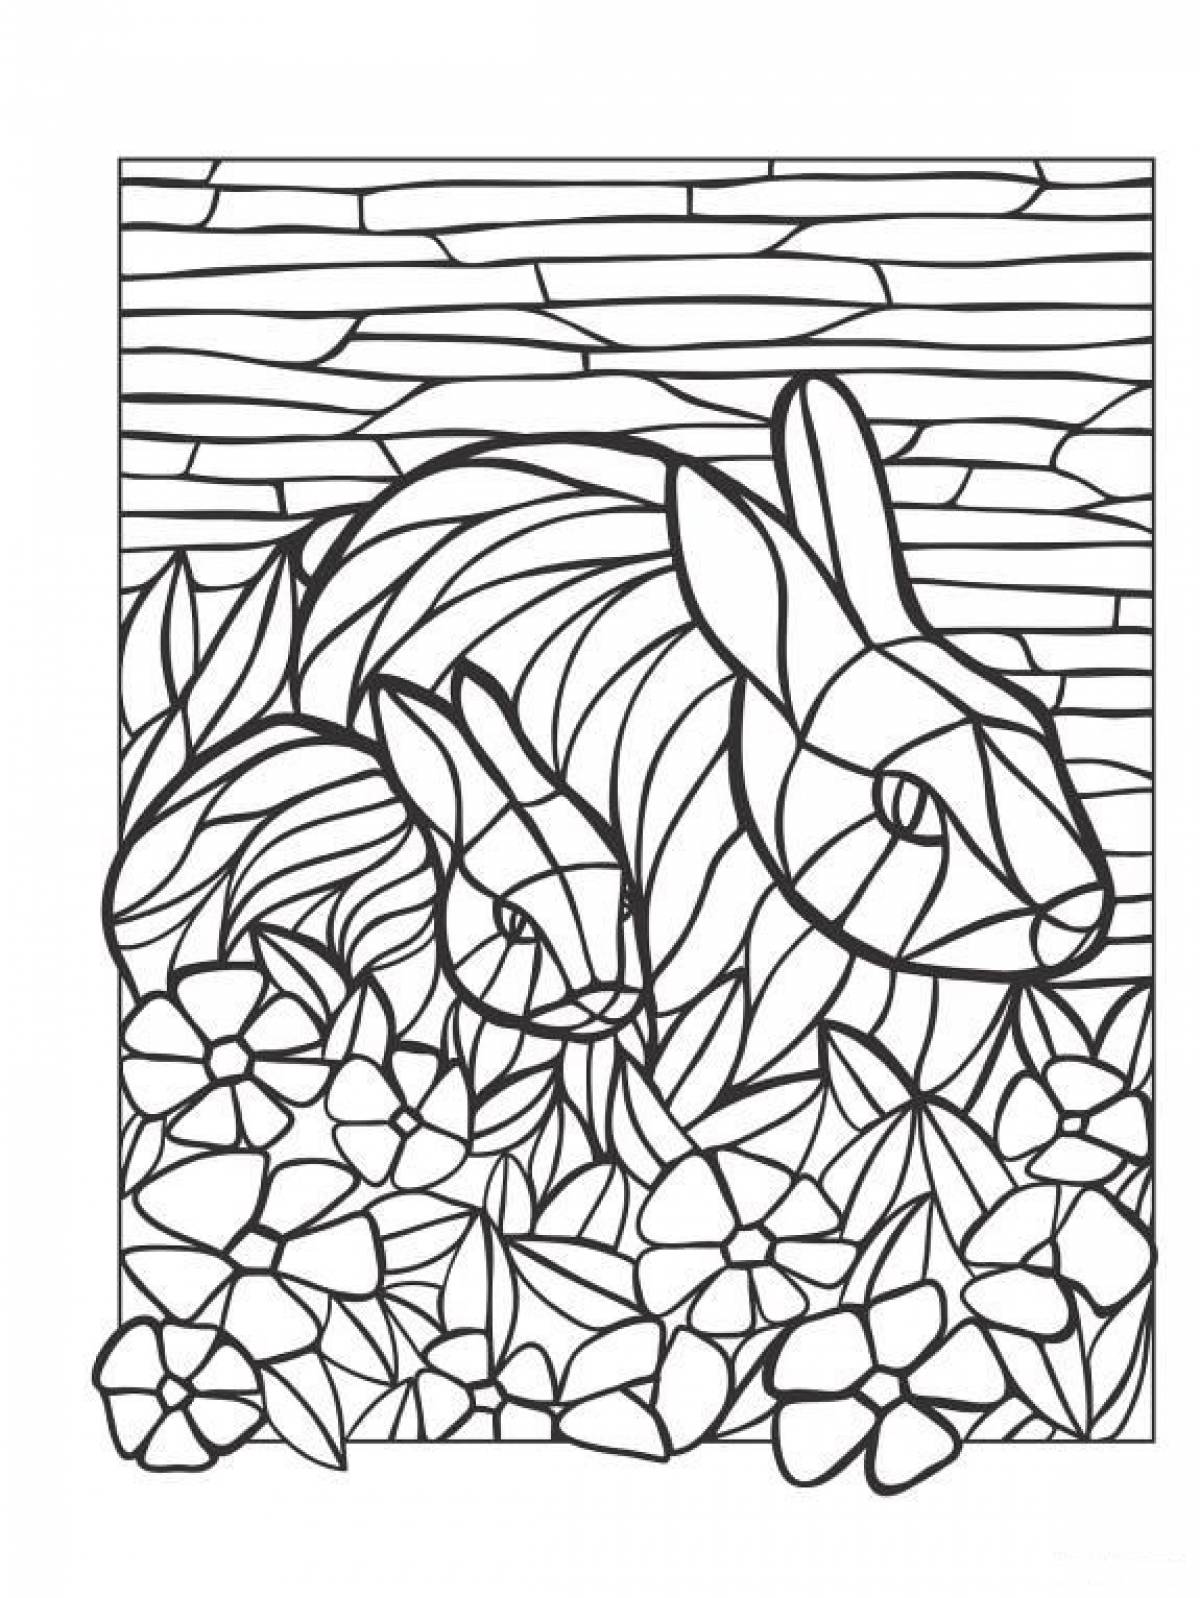 Stained glass hares